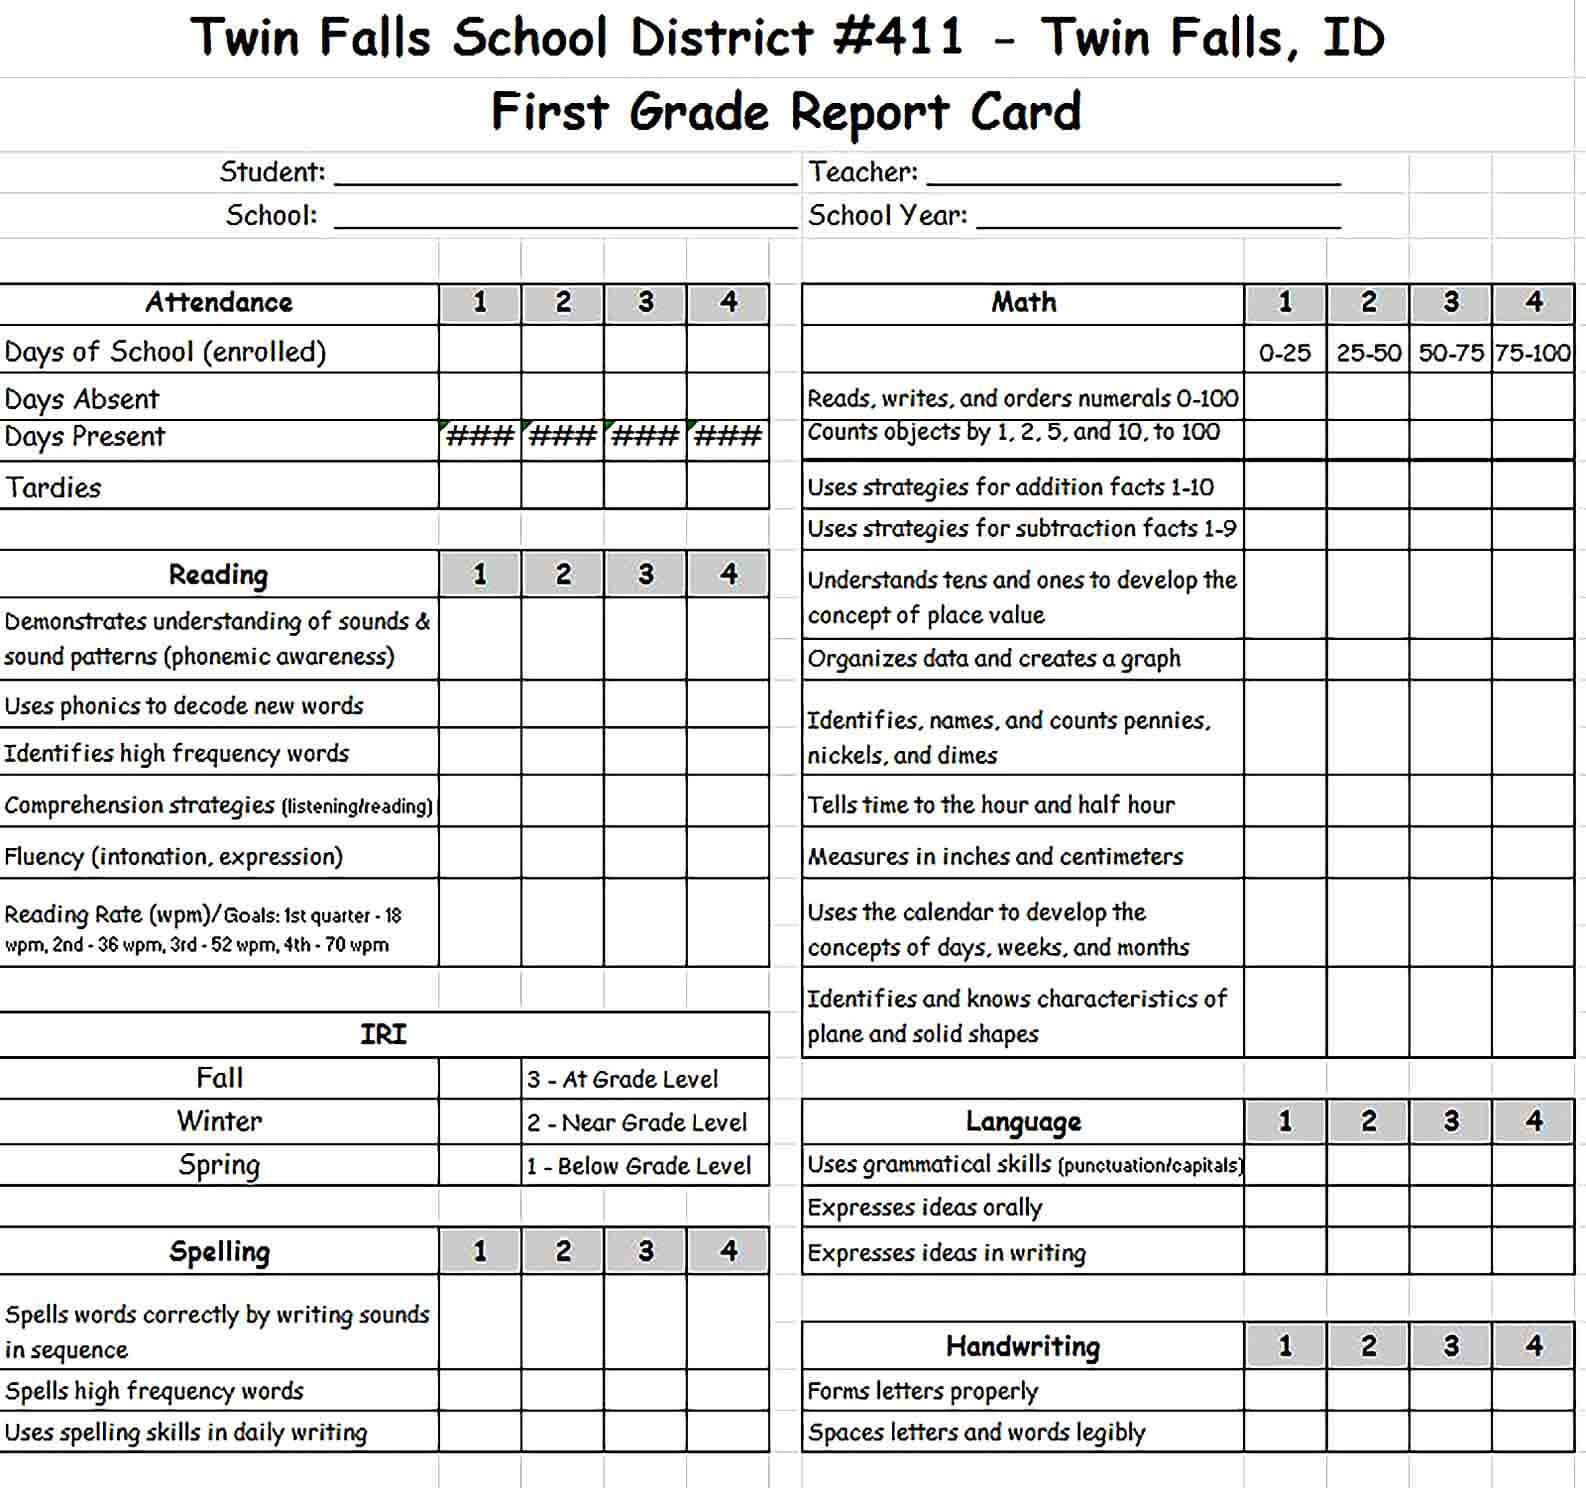 Sample First Grade Report Card Template Excel Format for